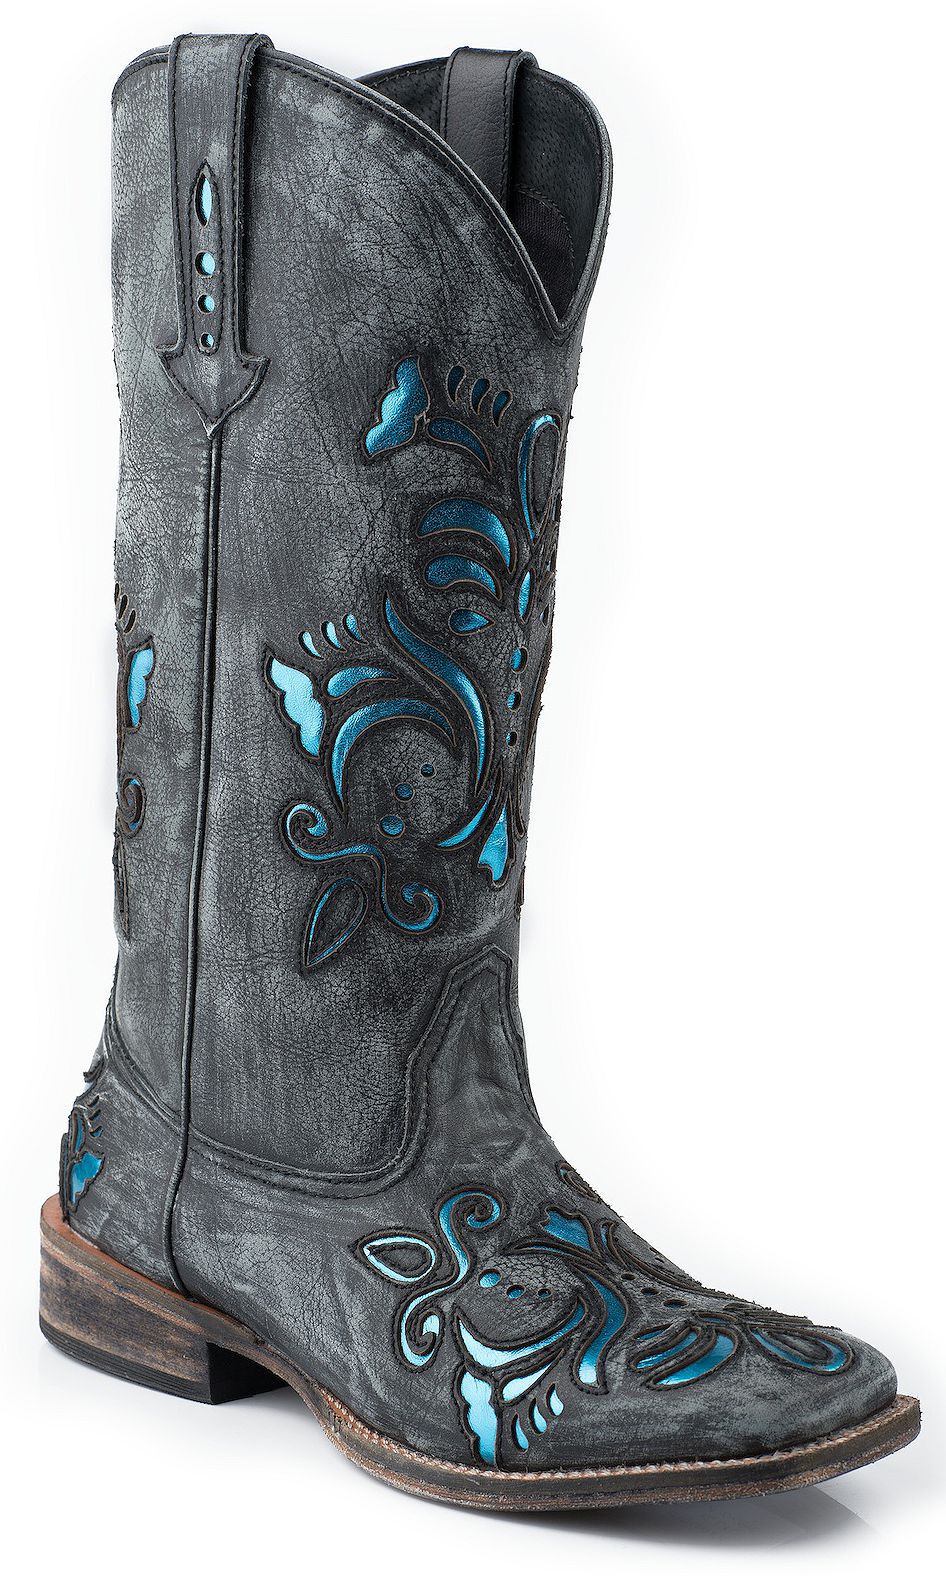 turquoise leather boots